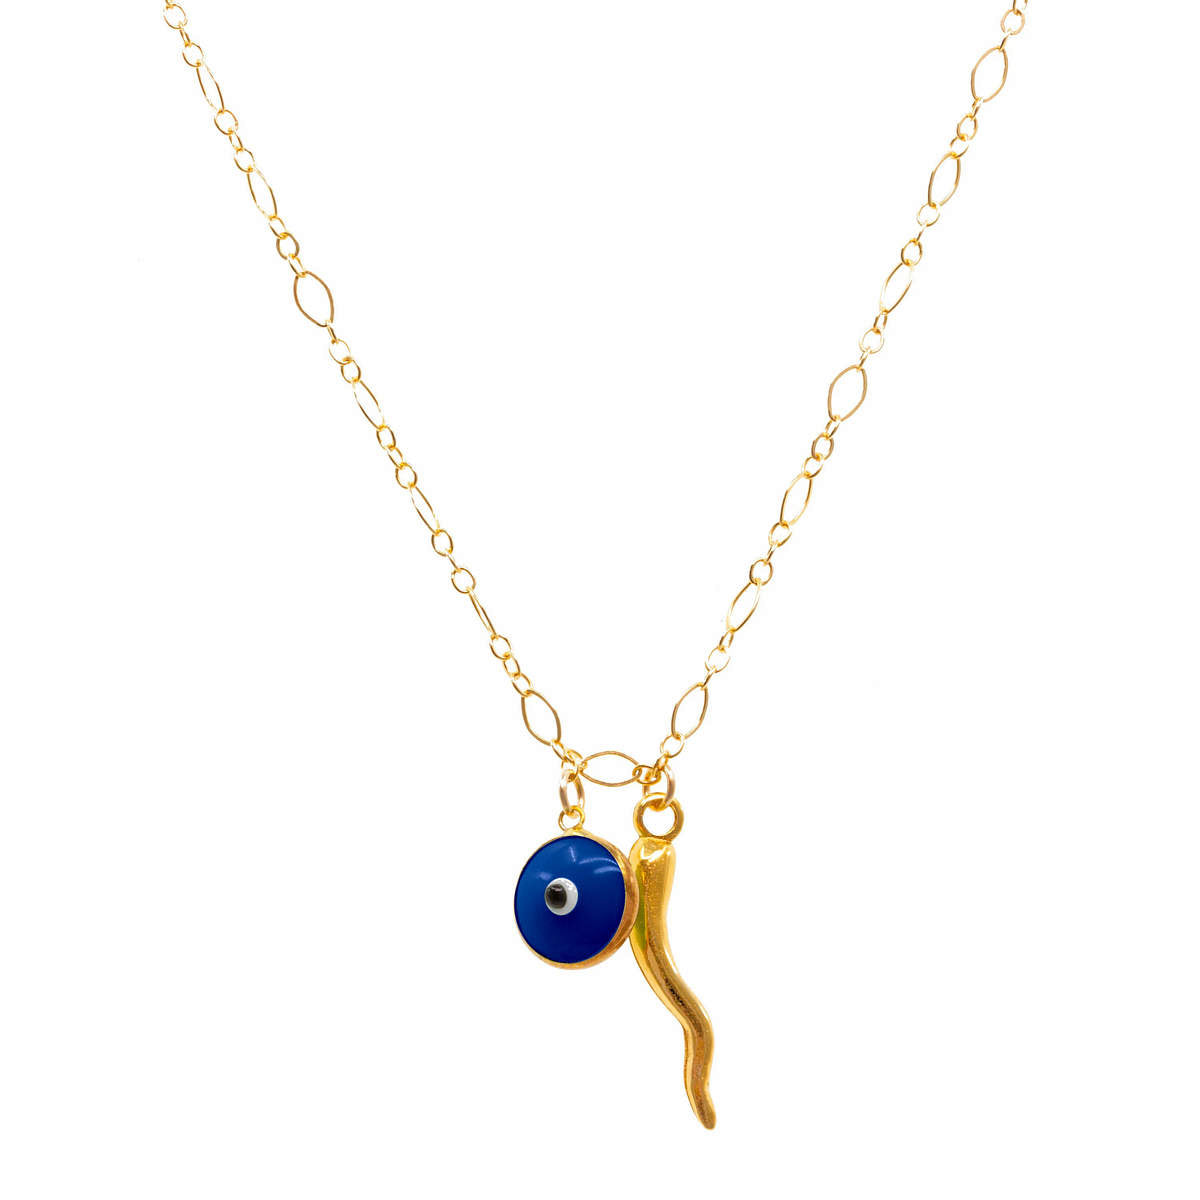 Double Dose Charm Necklace in Deep Sea